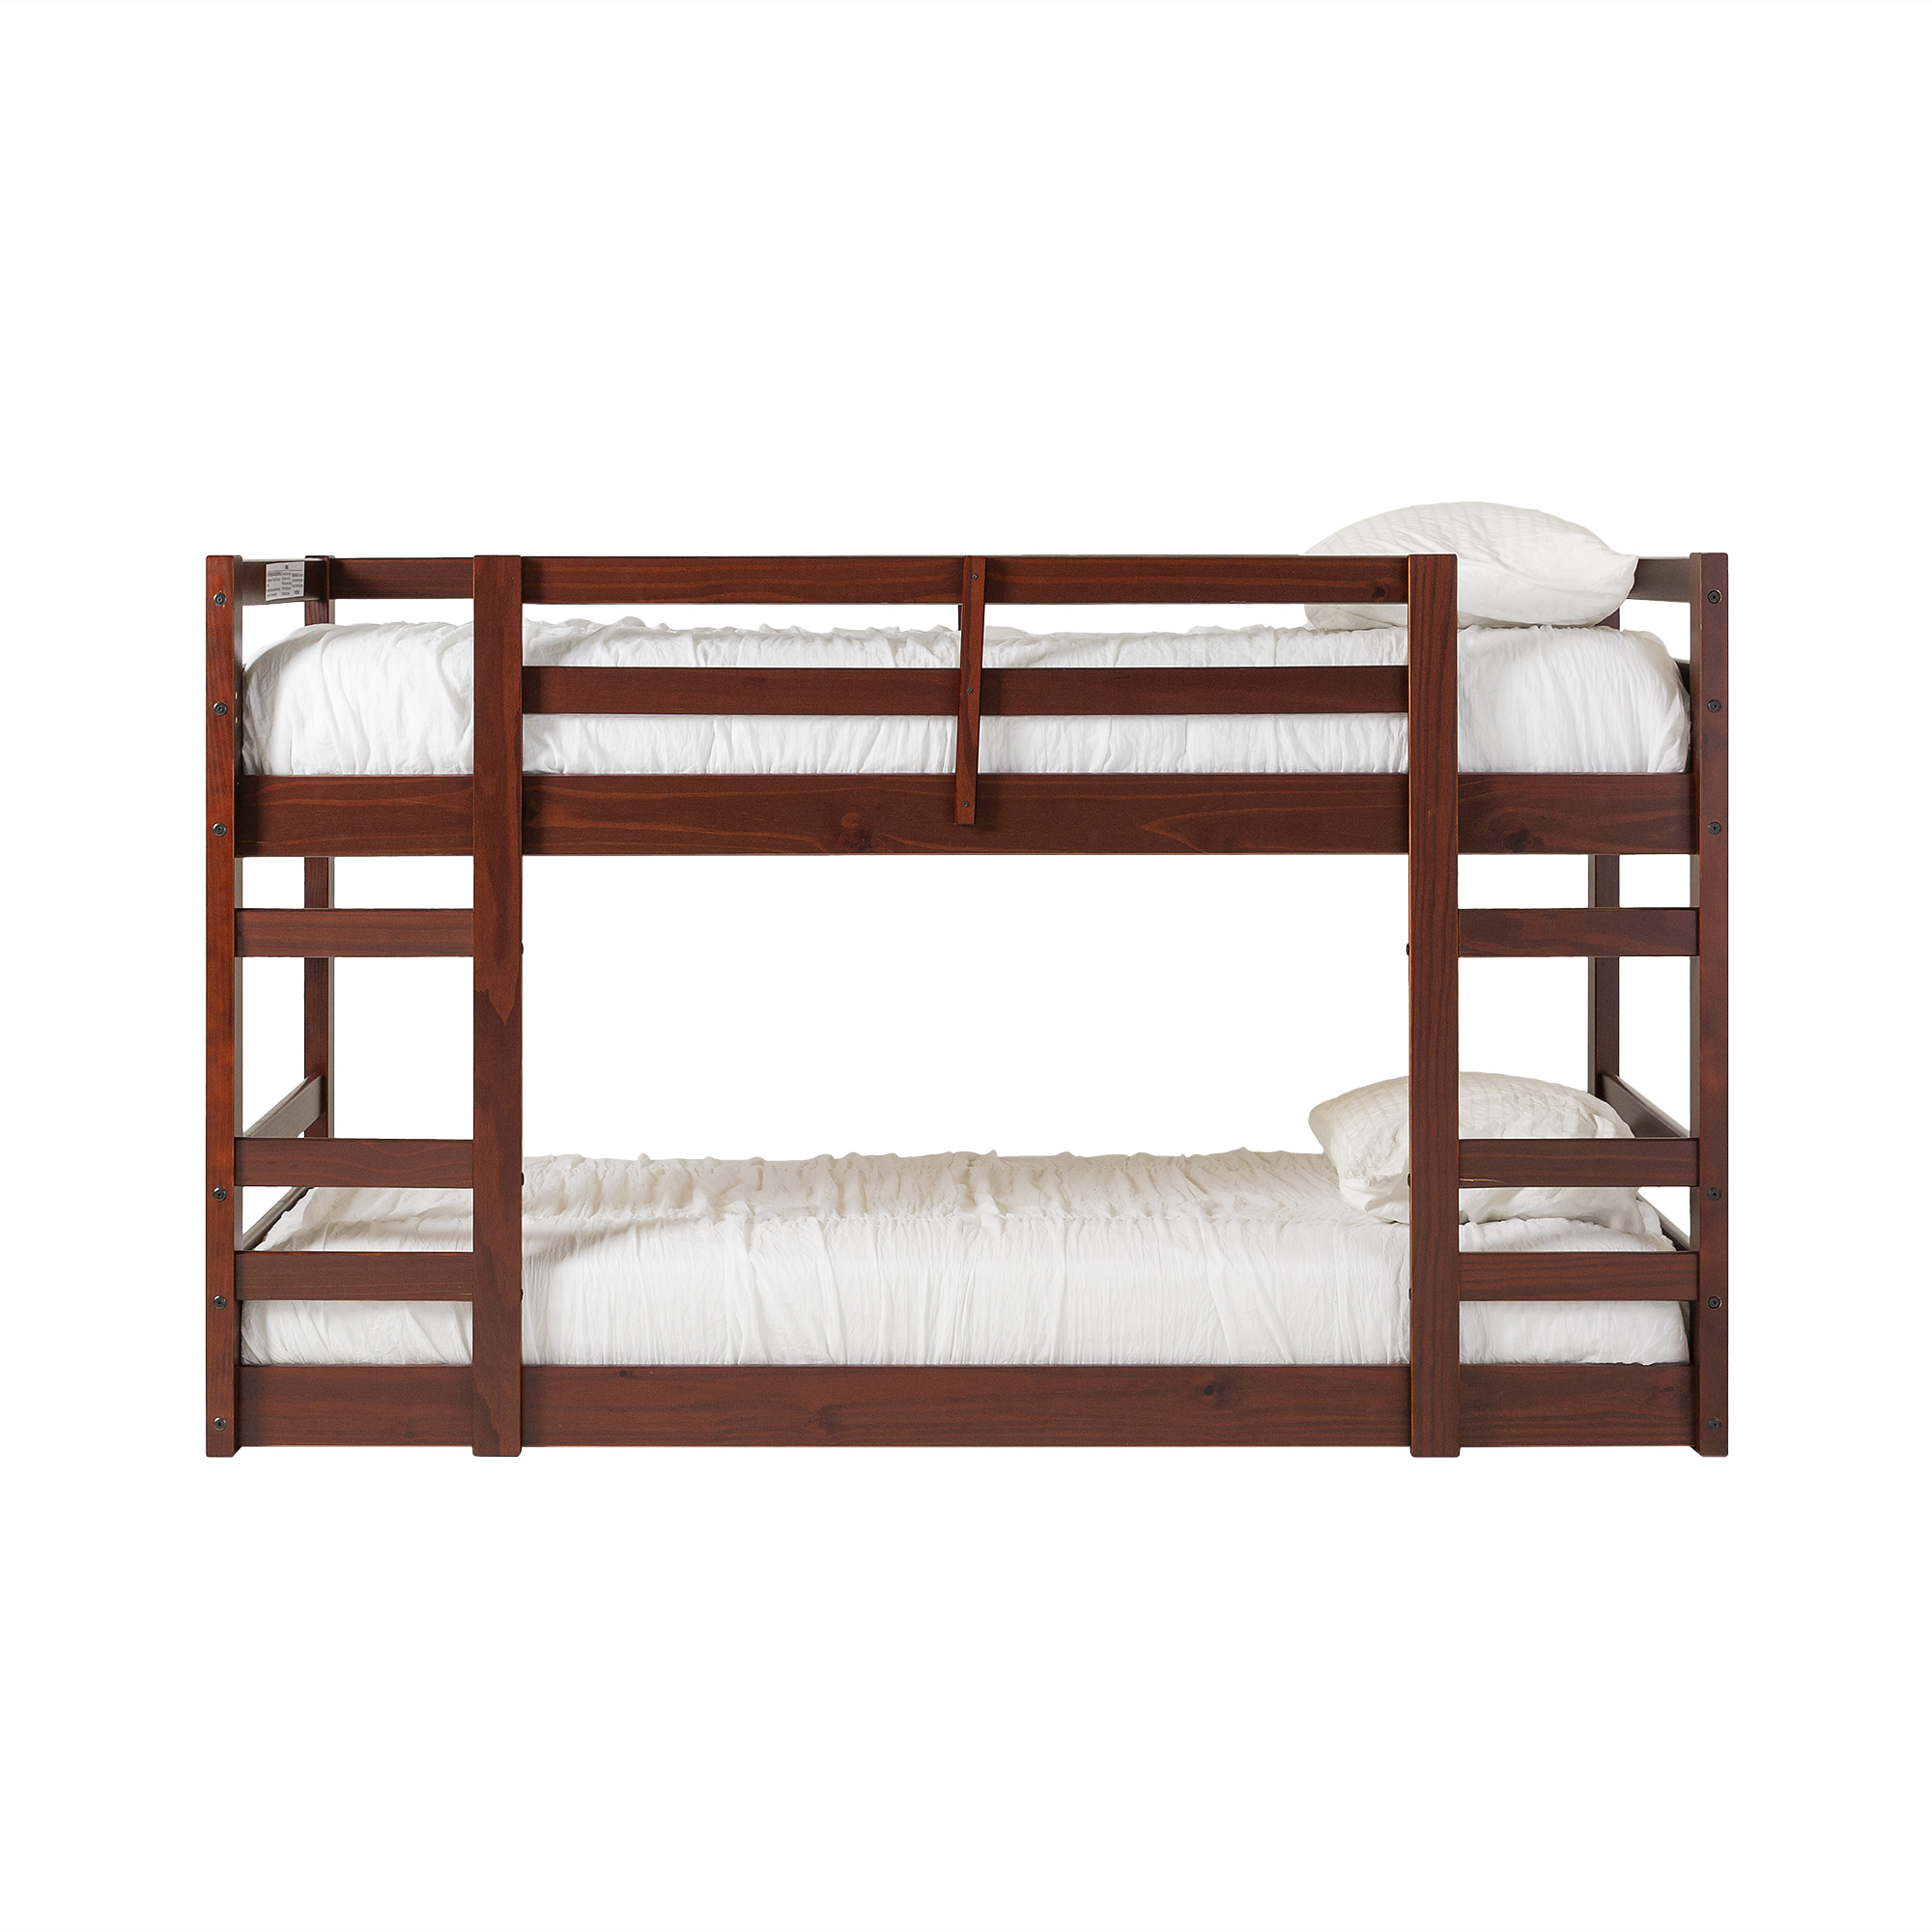 Manor Park Transitional Youth Twin Over Twin Bunk Bed Frame, Espresso - image 4 of 17